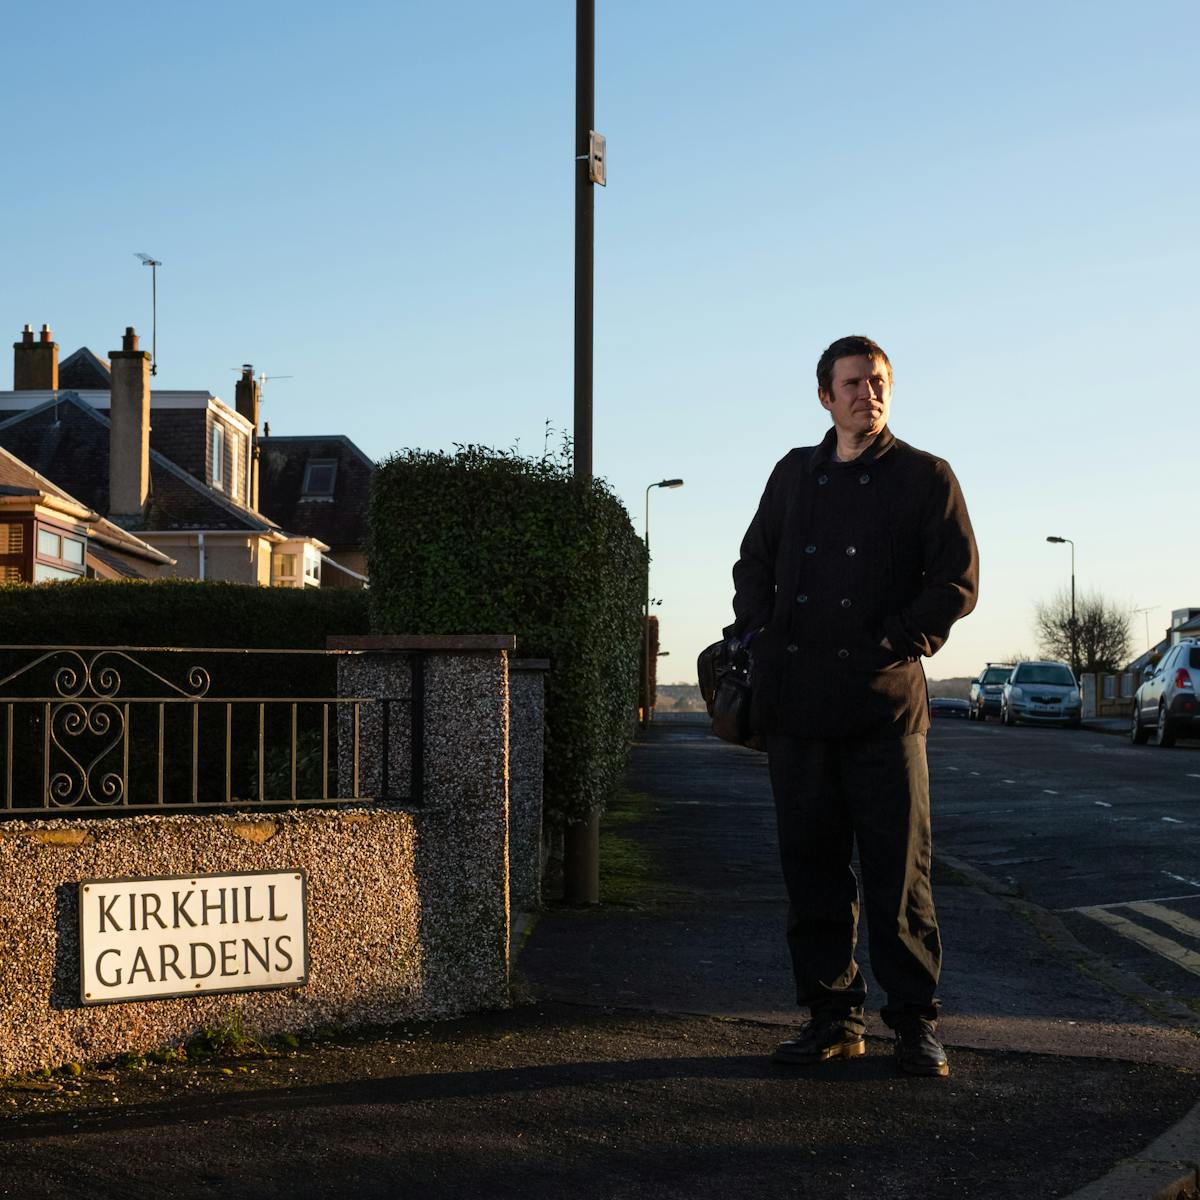 Photograph of a man in a black coat and trousers with a bag over his right shoulder. He is stood on a street corner, facing the camera but looking off to the right into the distance. A shaft of low golden sunlight picks him out from the suburban street scene around him made up of parked cars, houses and street lights. The sky is a pure blue. On a wall to the left is a road name sign carrying the words, 'Kirkhill Gardens'.